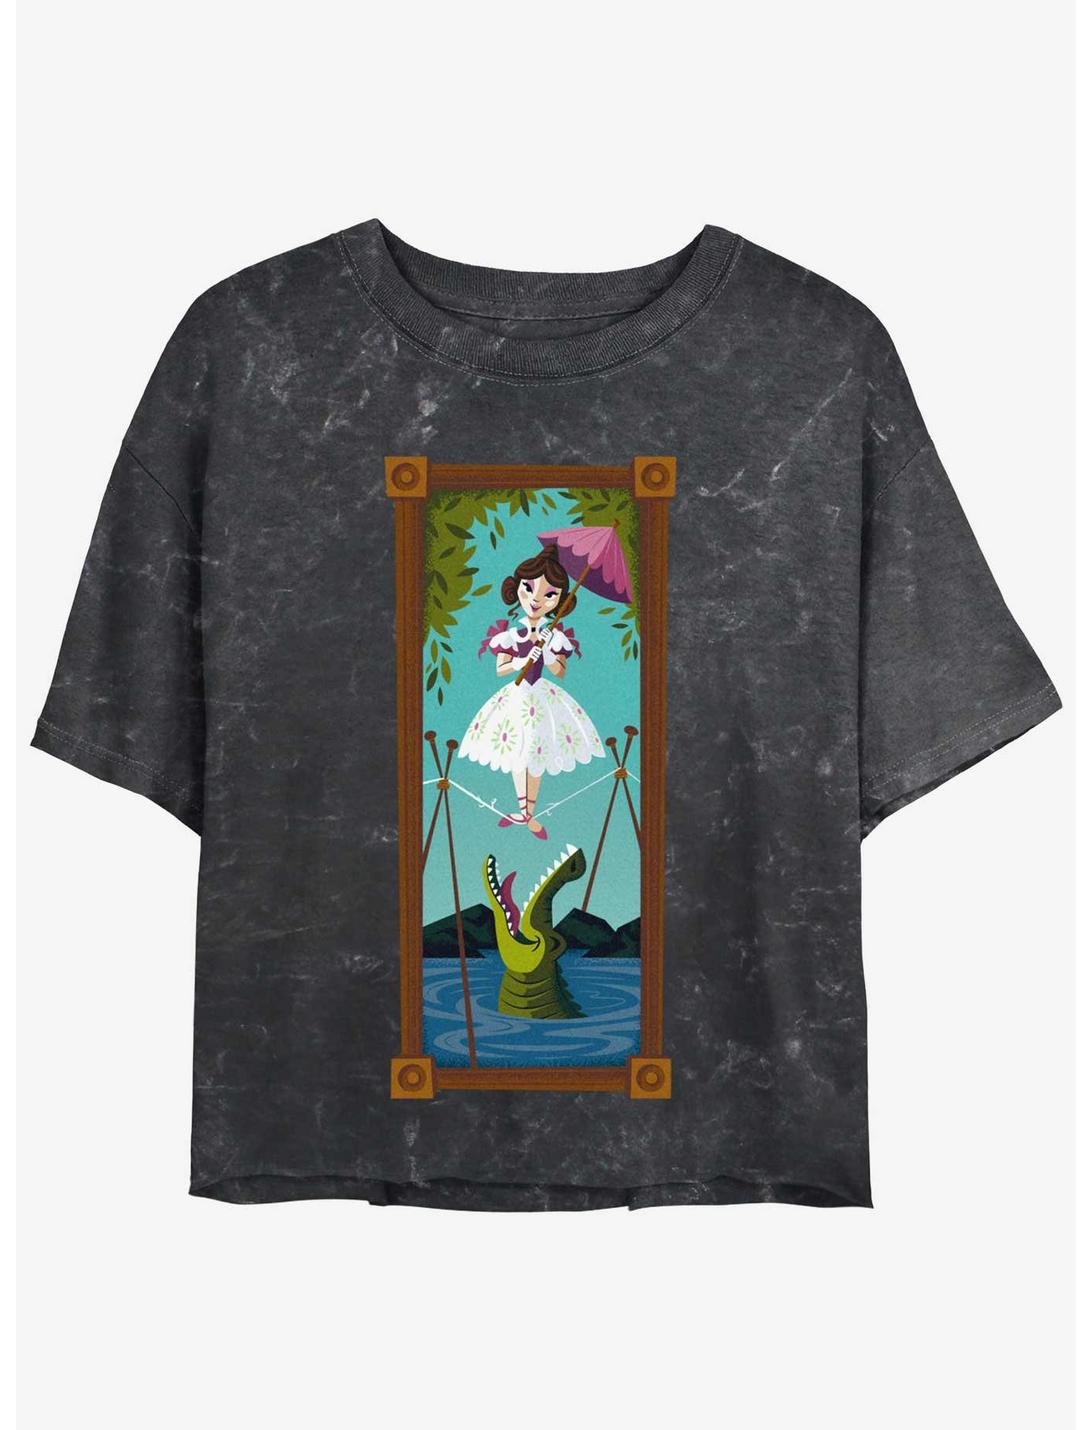 Disney The Haunted Mansion The Tightrope Walker Portrait Girls Mineral Wash Crop T-Shirt Hot Topic Web Exclusive, BLACK, hi-res